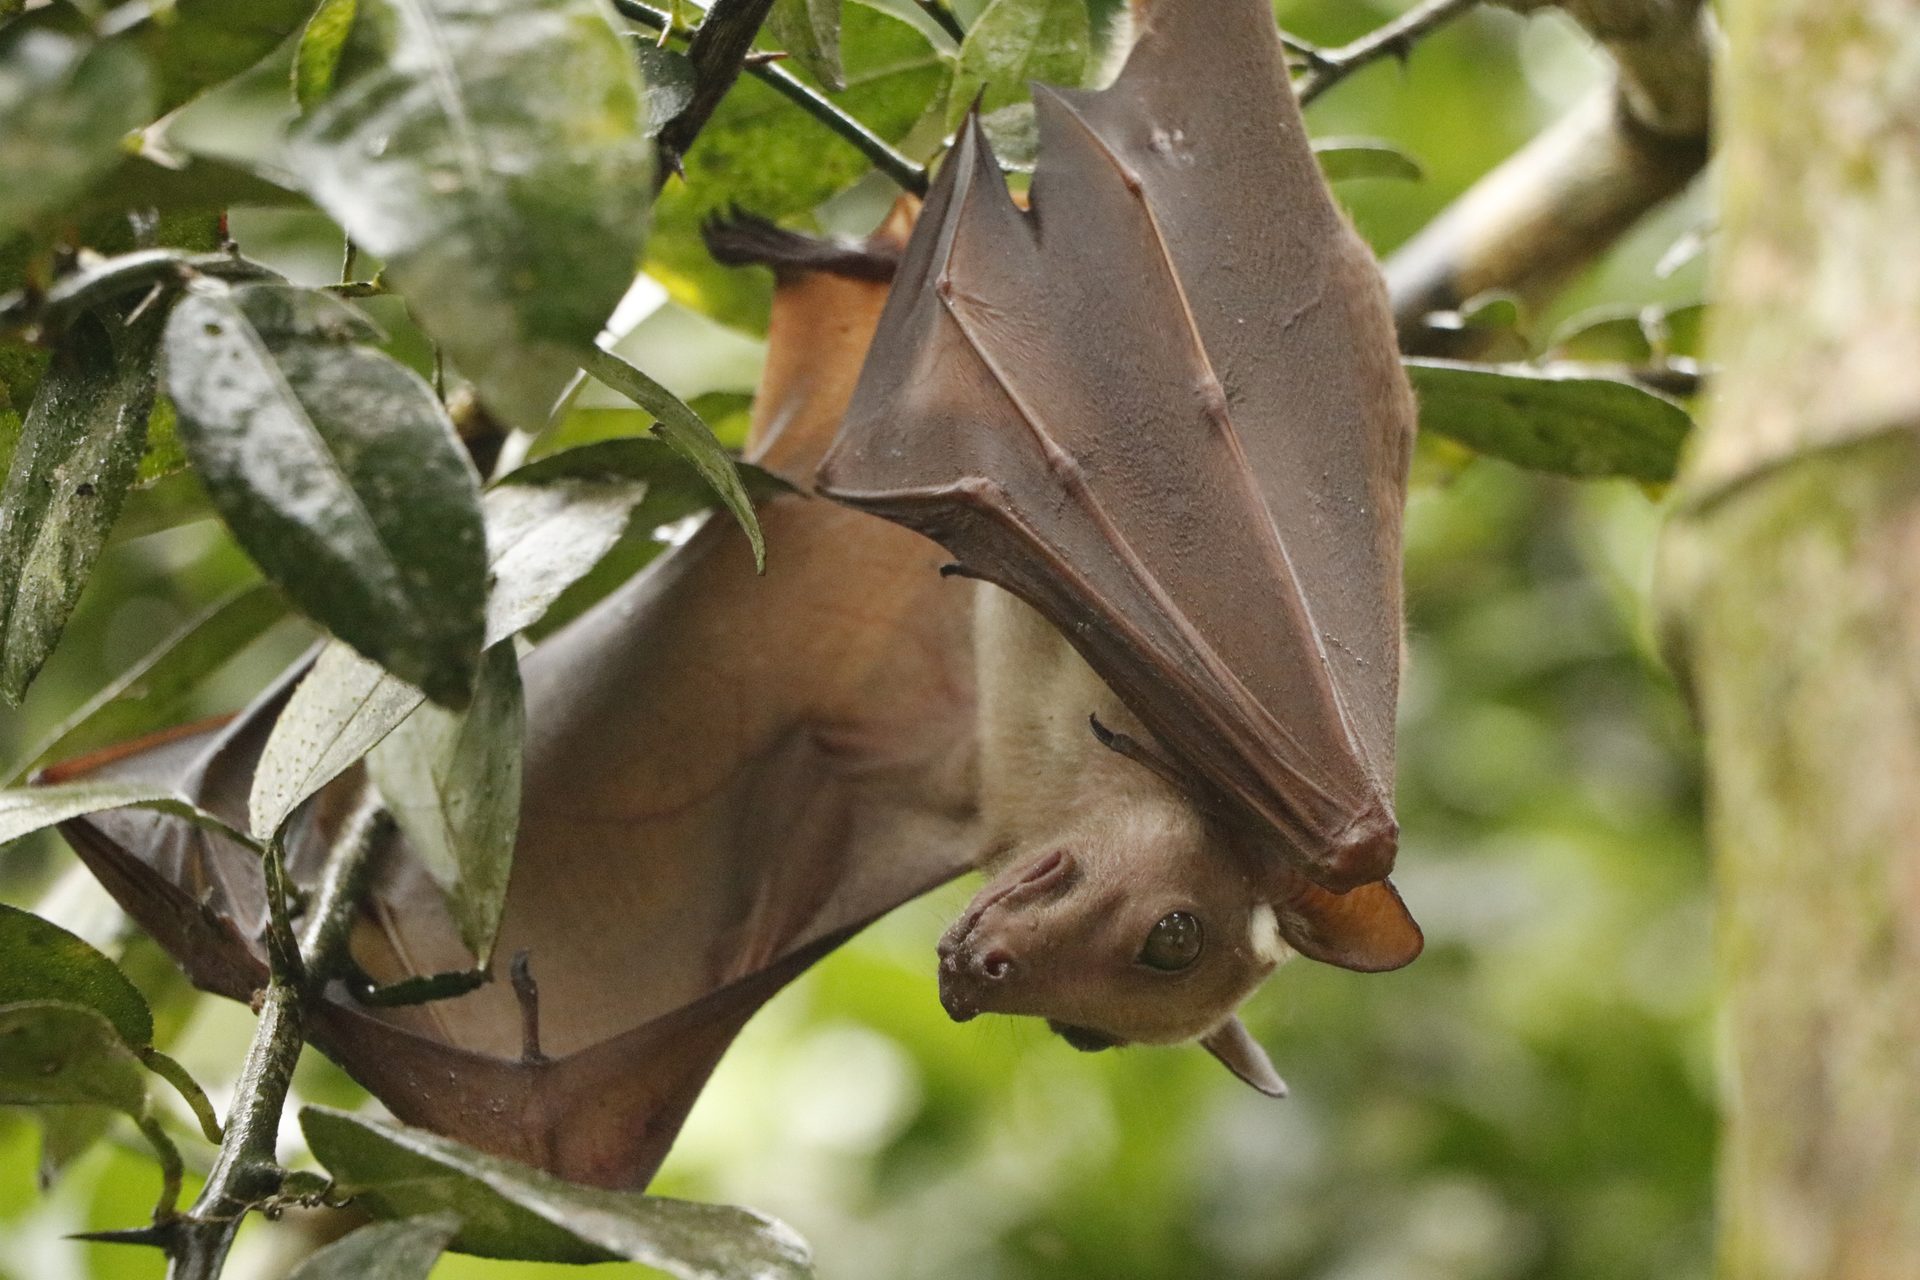 Bats are essential to maintain balanced ecosystems. But they can also be hosts to pathogens responsible for zoonoses. Protecting their health is protecting the health of the environment as well as human health.